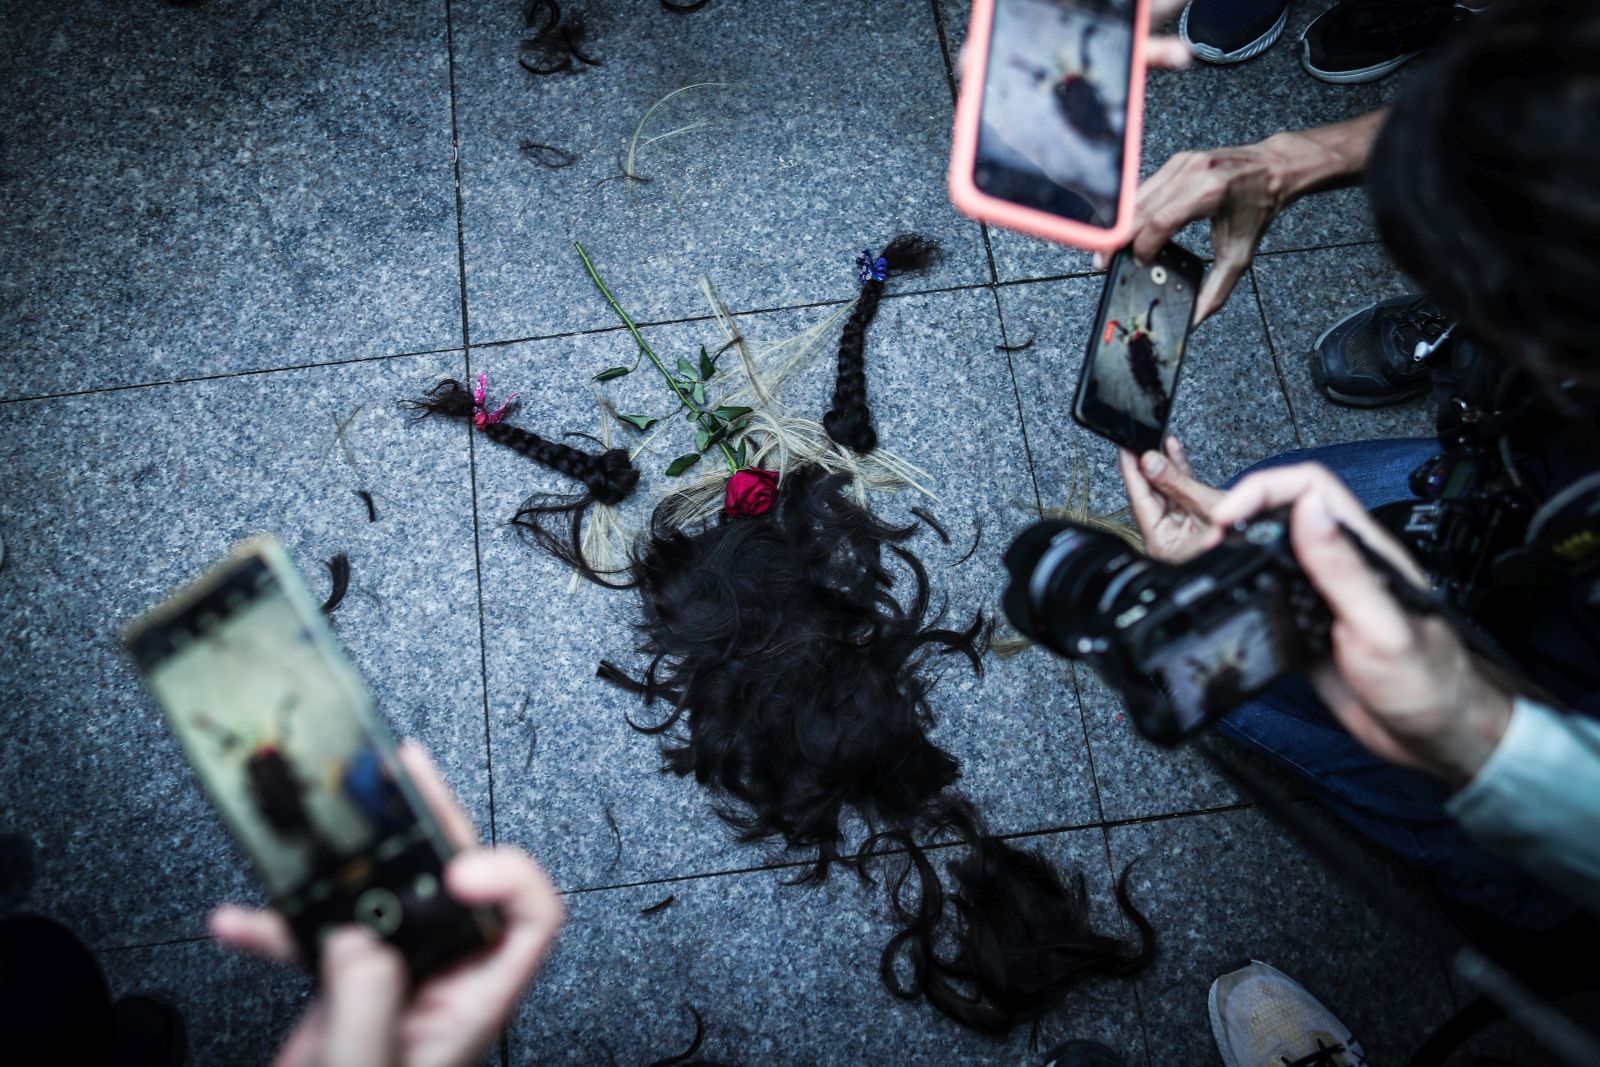 epa10219887 People take photos of a pile of hair cut by Iranian women during a protest following the death of Iranian Mahsa Amini, in Istanbul, Turkey, 02 October 2022. Amini, a 22-year-old Iranian woman, was arrested in Tehran on 13 September by the police unit responsible for enforcing Iran's strict dress code for women. She fell into a coma while in police custody and was declared dead on 16 September.  EPA/SEDAT SUNA